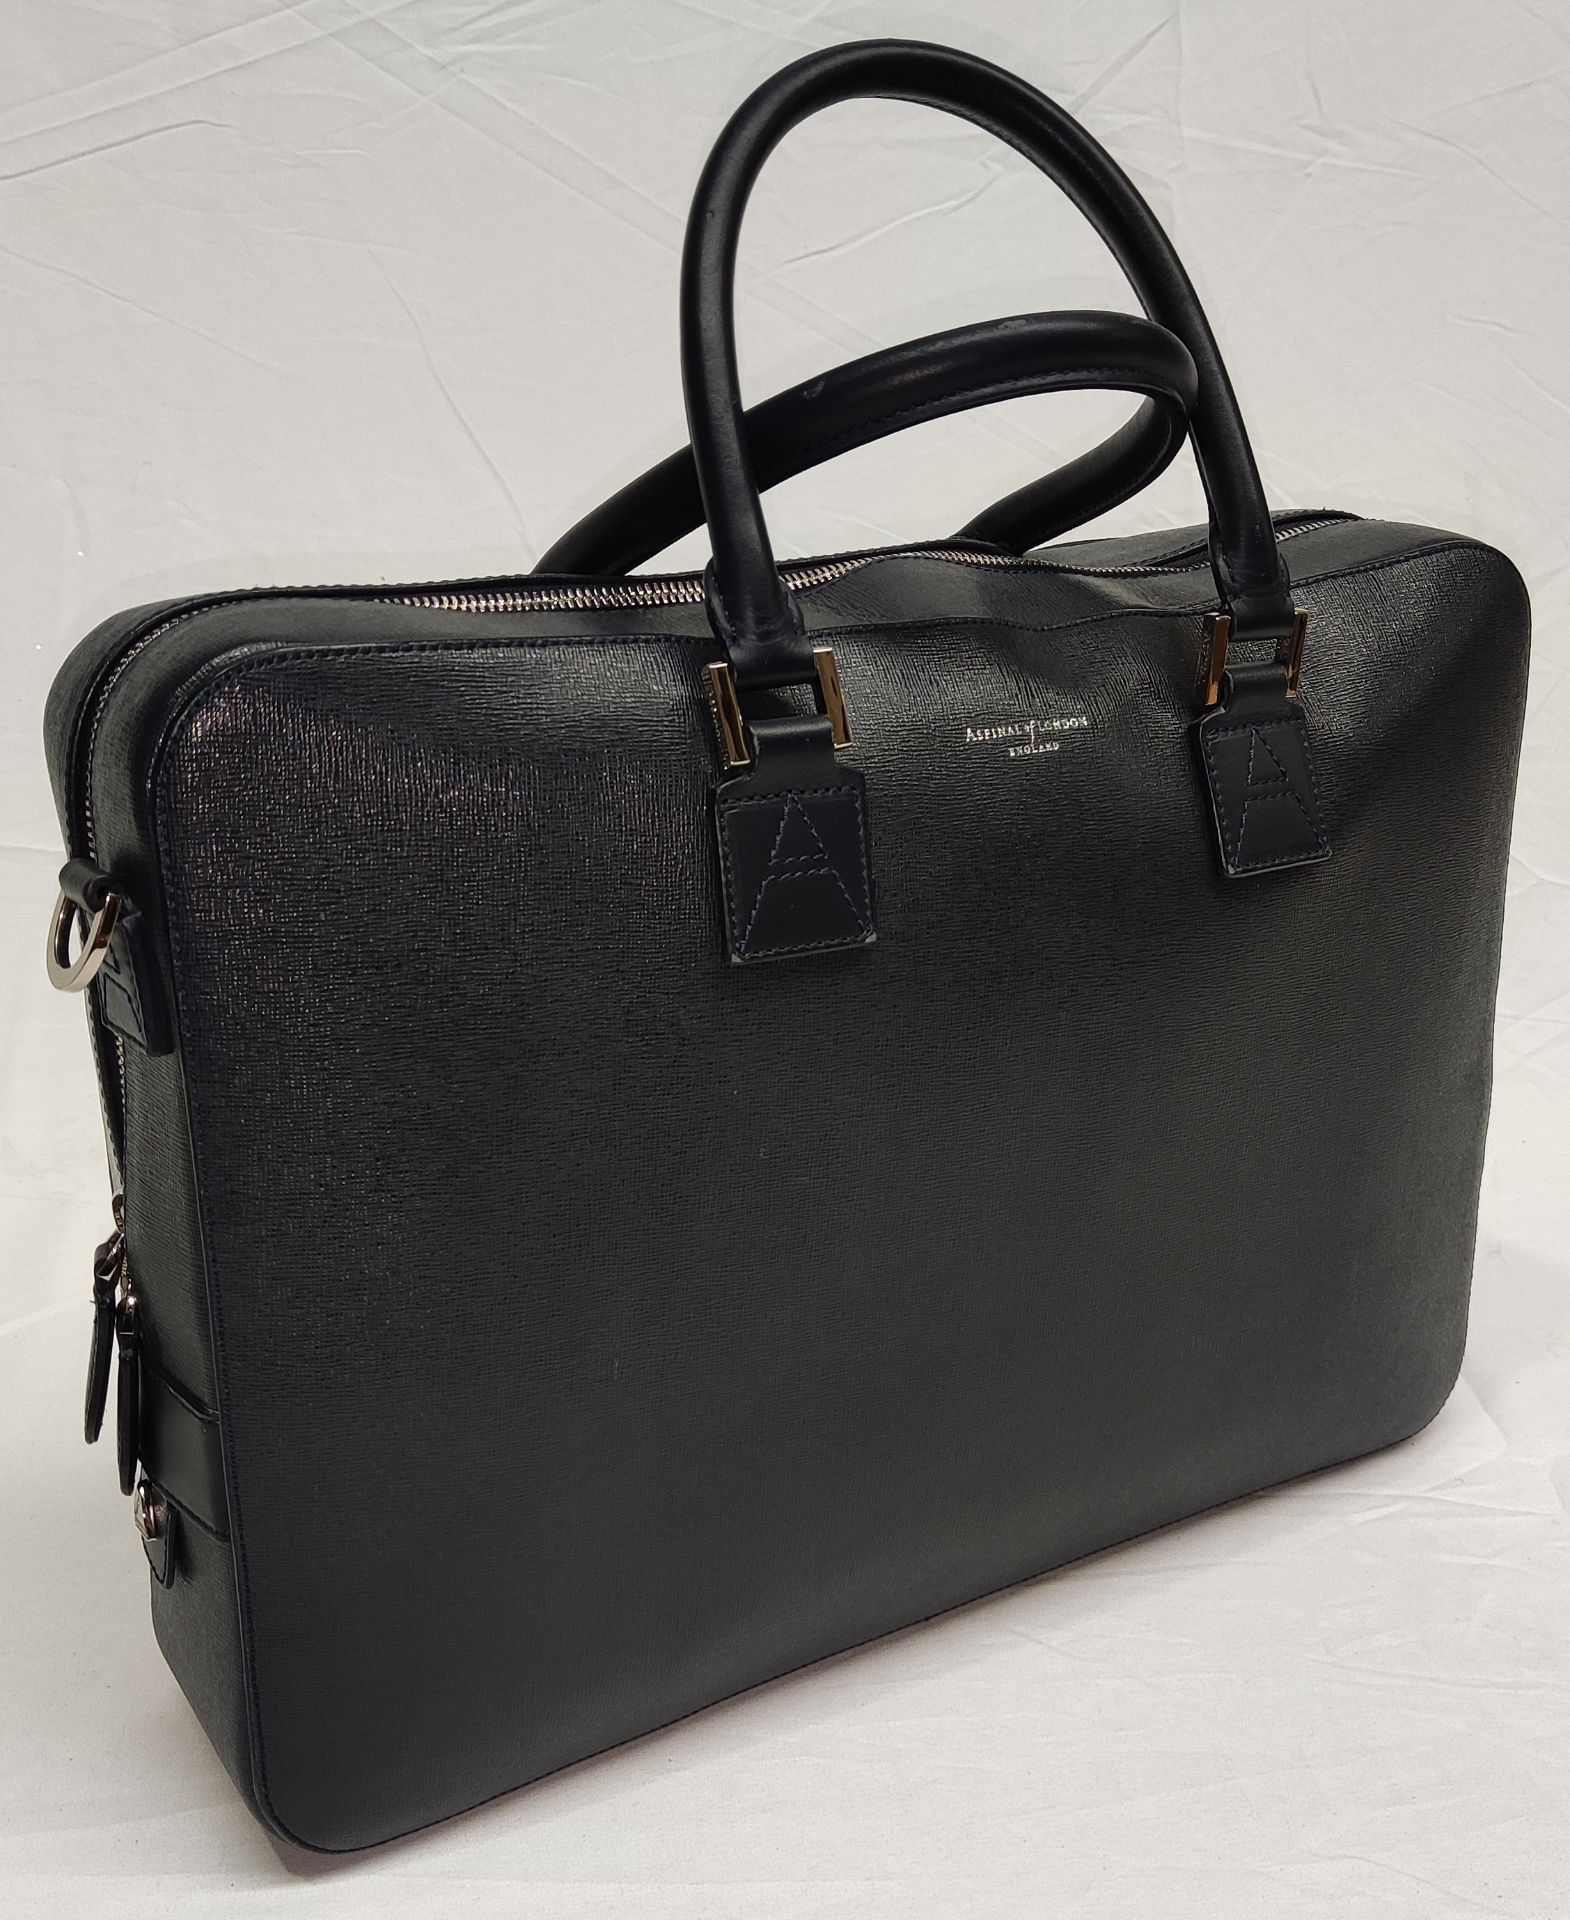 1 x ASPINAL OF LONDON Mount Street Small Laptop Bag In Black Saffiano - Original RRP £650 - Ref: - Image 5 of 21